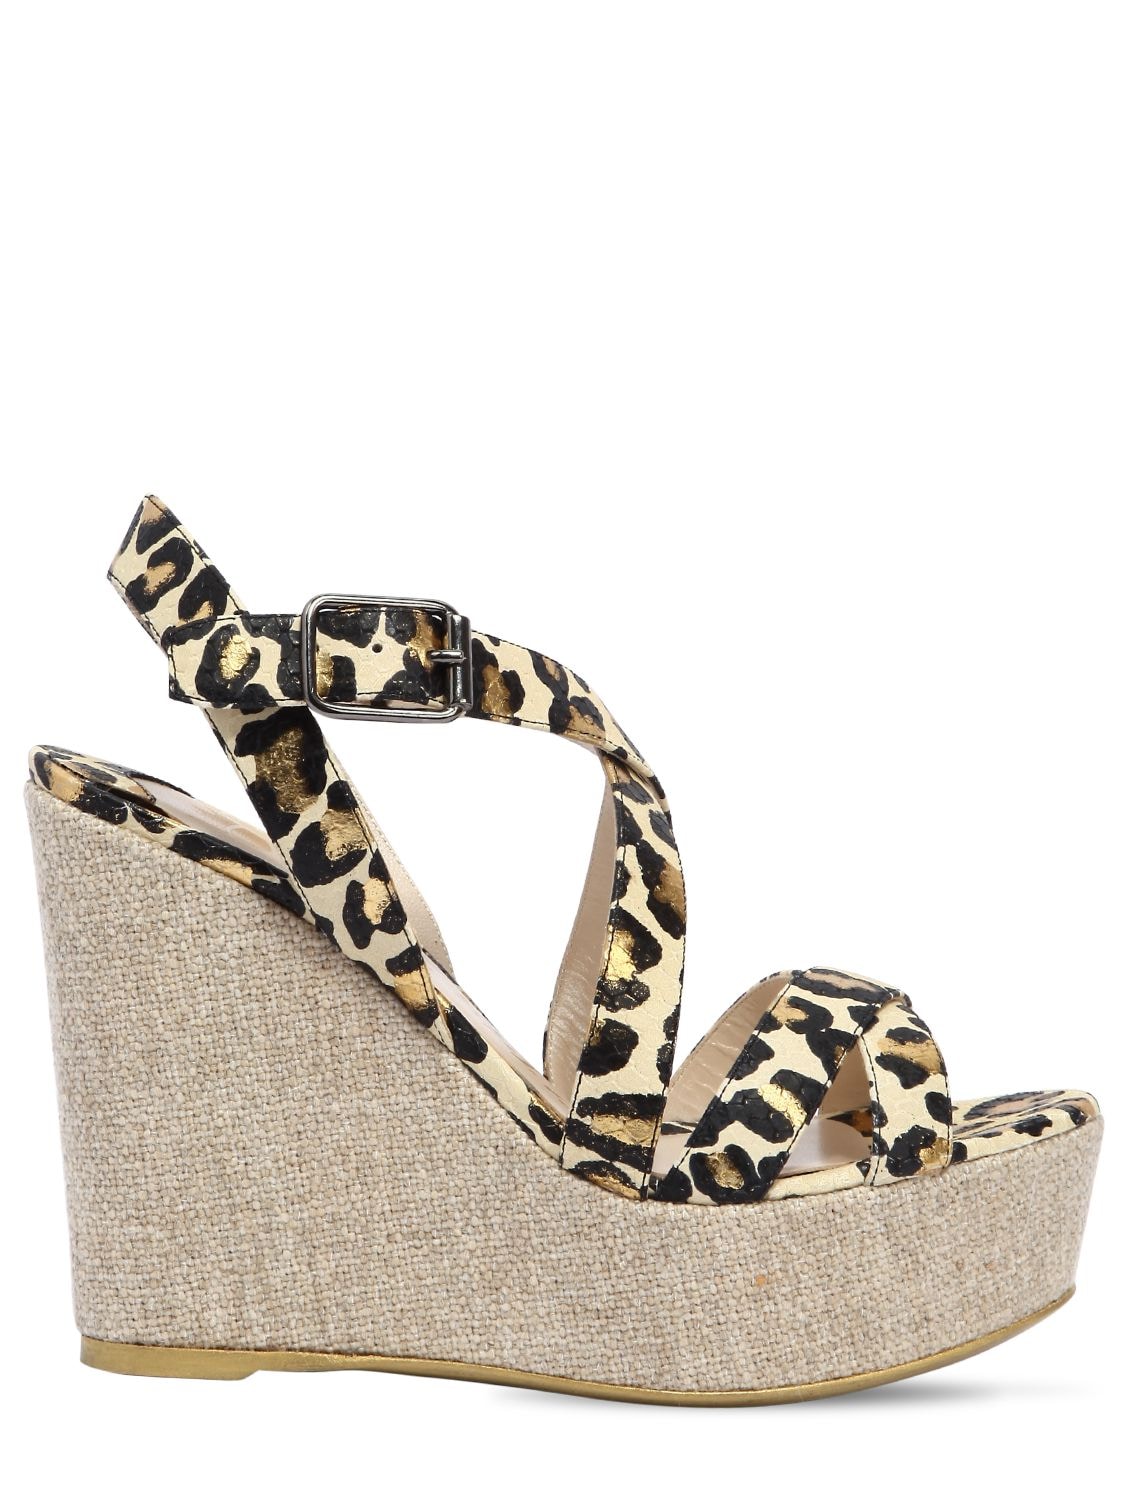 Ernesto Esposito 120mm Snake Printed Leather Wedges In Leopard